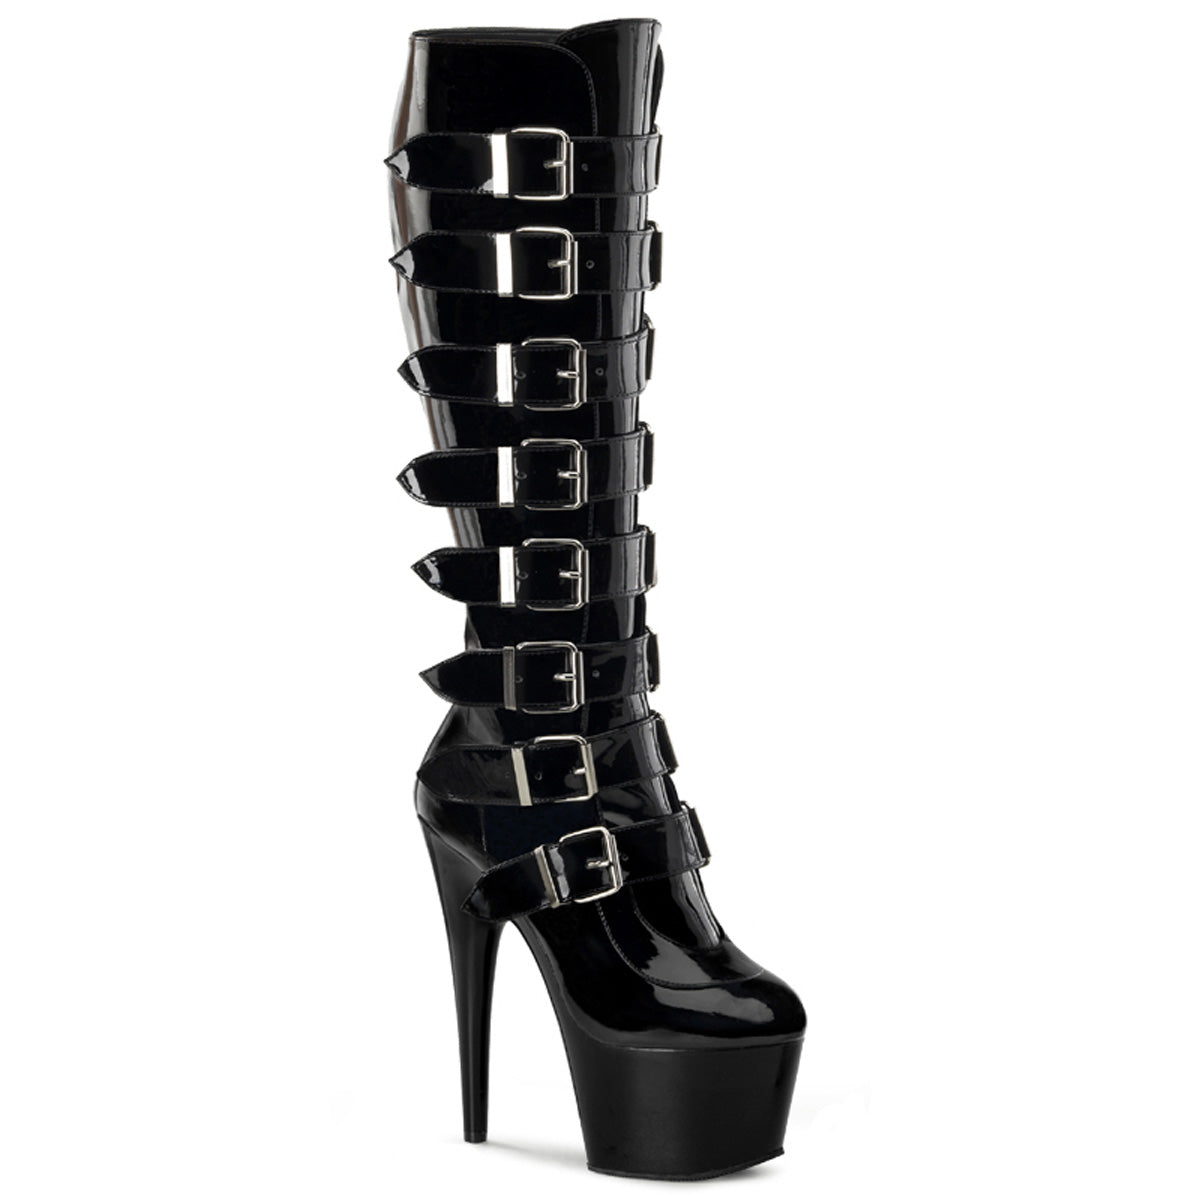 PLEASER ADORE-2043 BLACK SHINY GOTH BUCKLE KNEE HIGH BOOTS SIZE 8 USA SALE